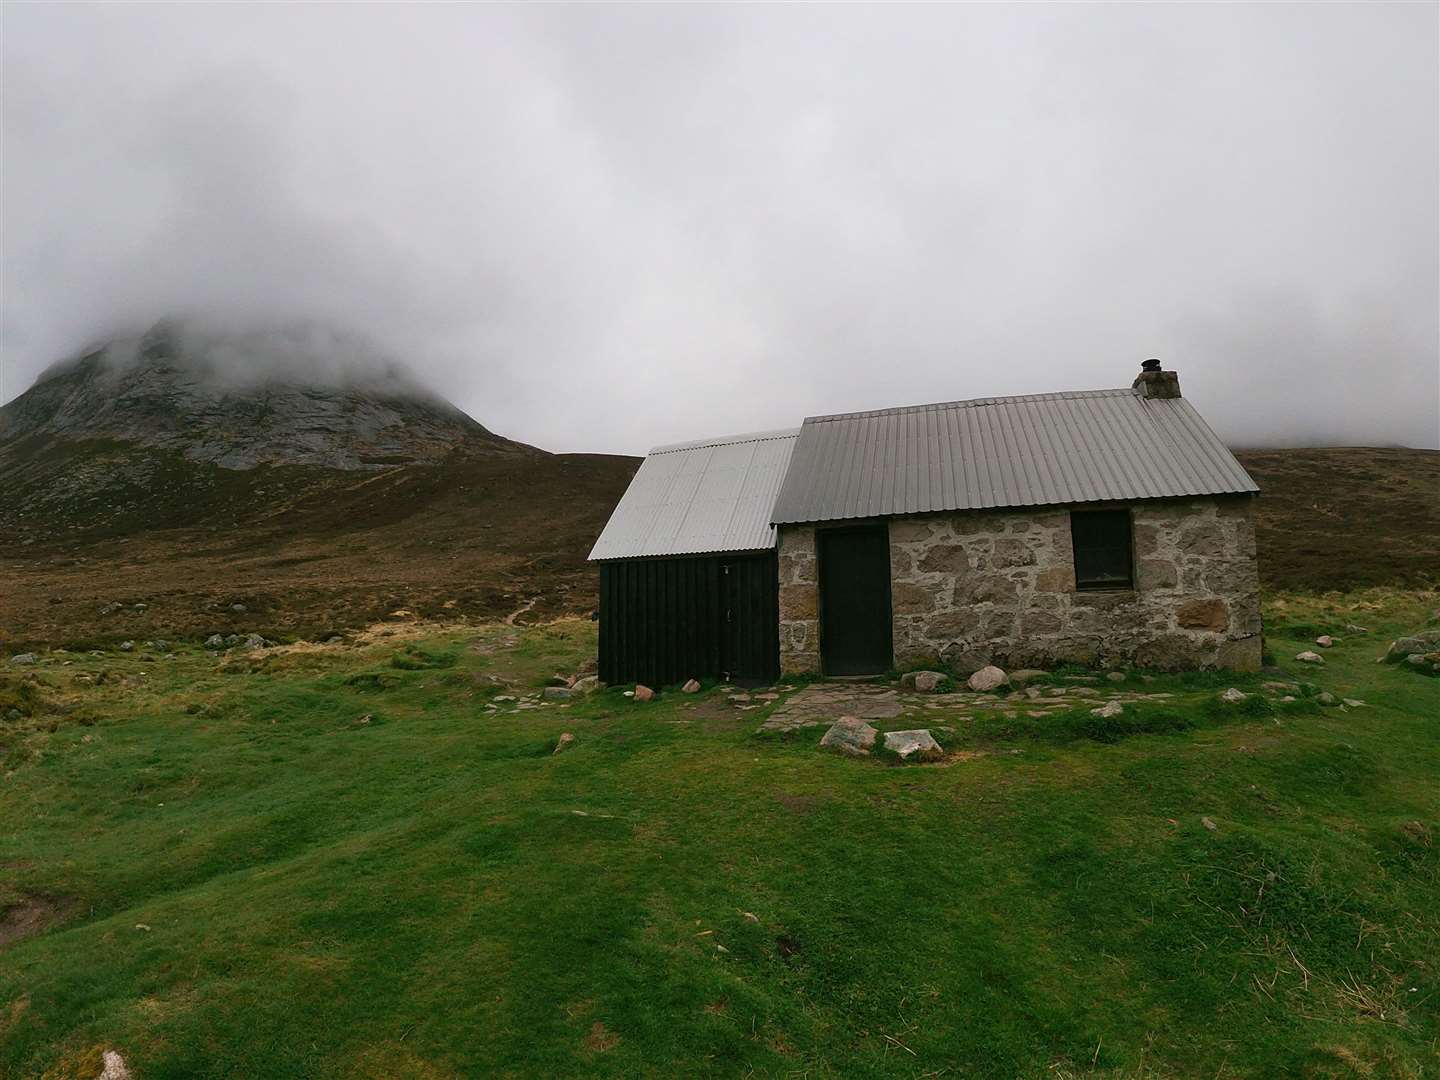 Corrour bothy in the Lairig Ghru.